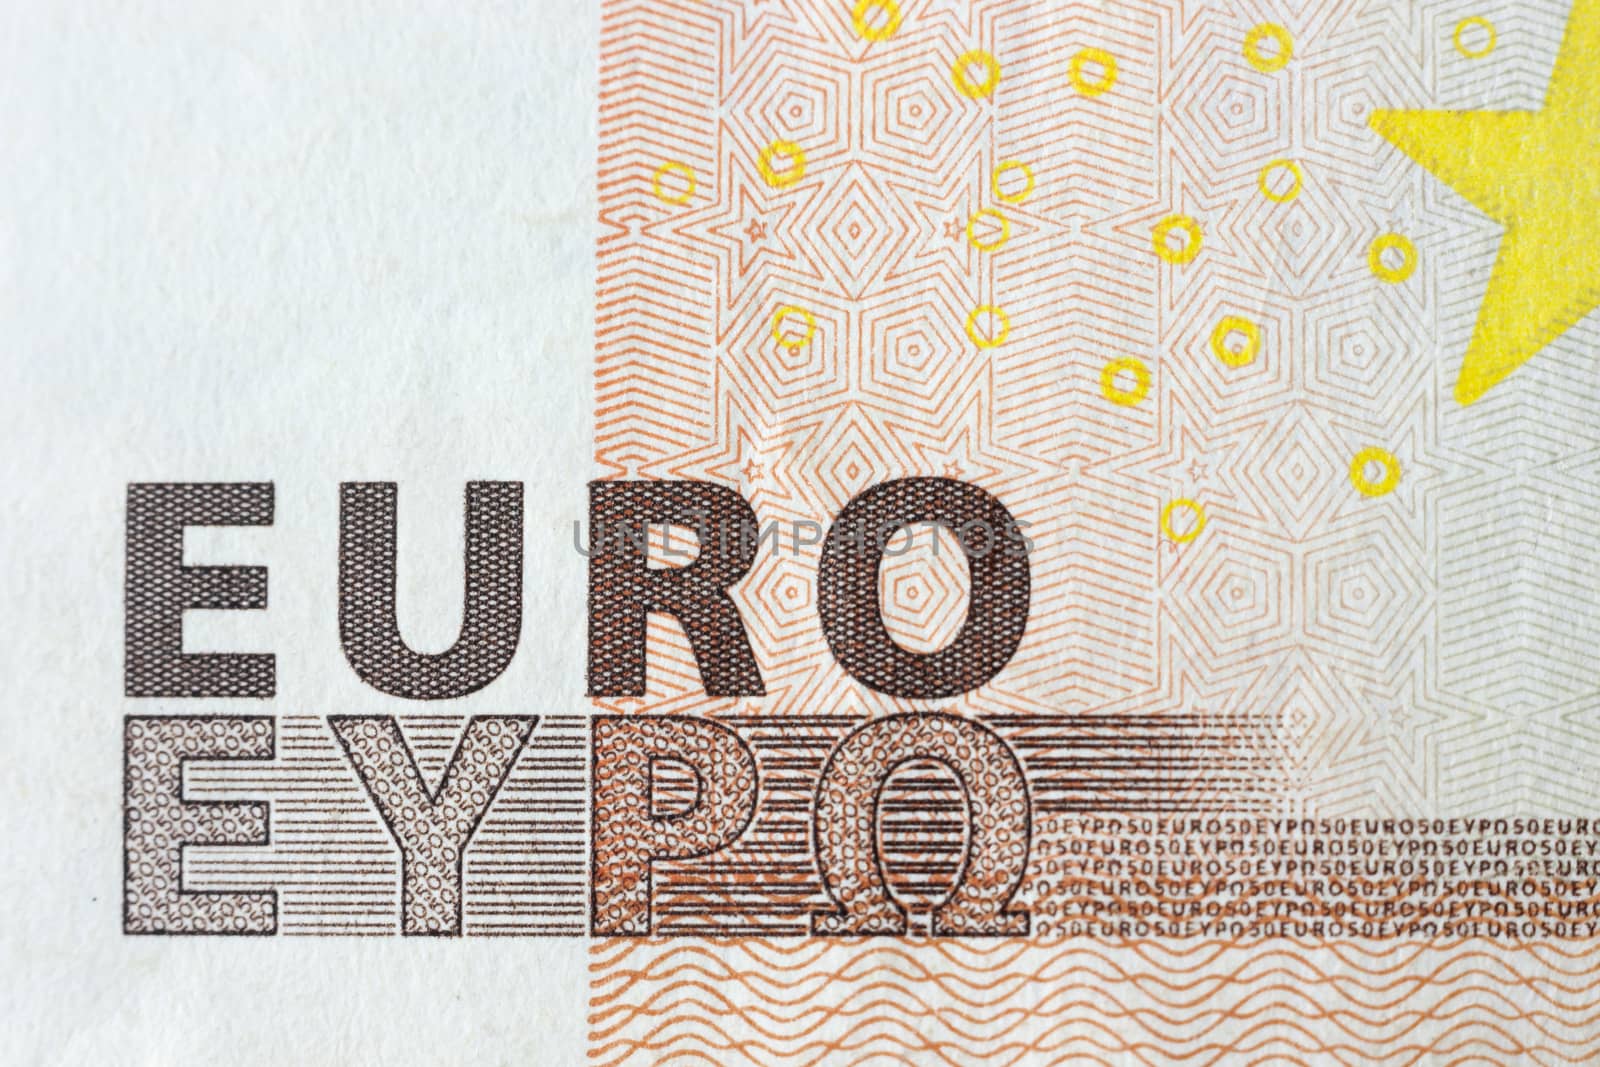 Euro banknotes, detailed text on a new fifty euro banknotes by mailos